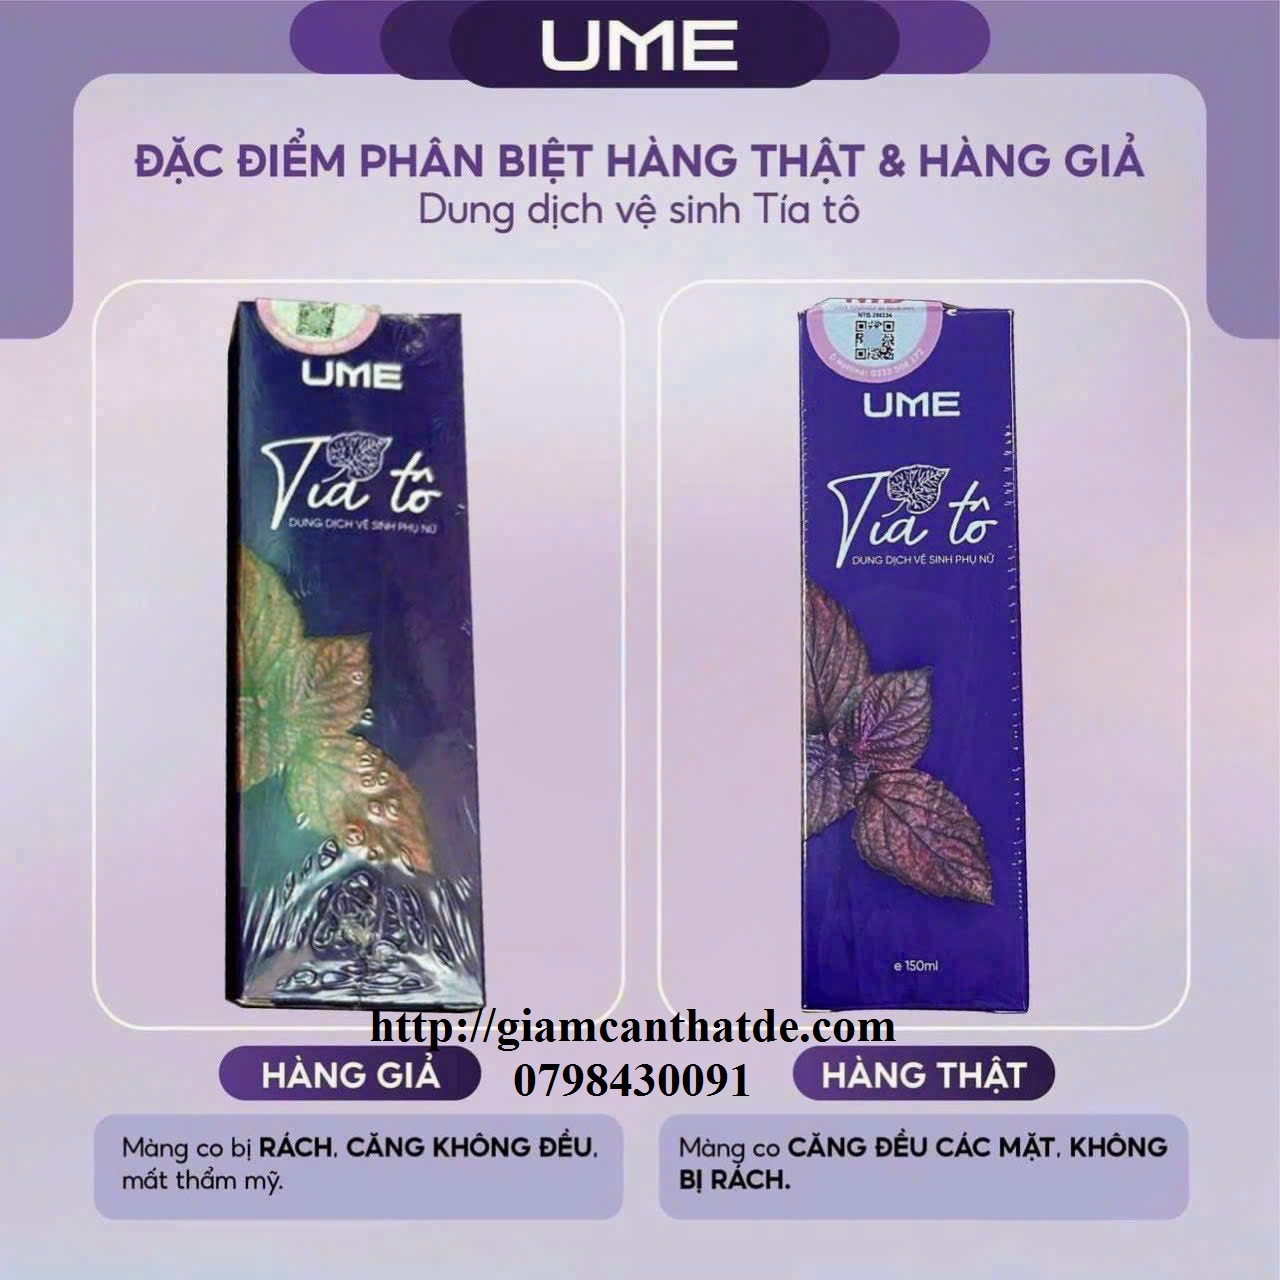 cach_phan_biet_that_gia_dung_dich_ve_sinh_phu_nu_tia_to_ume